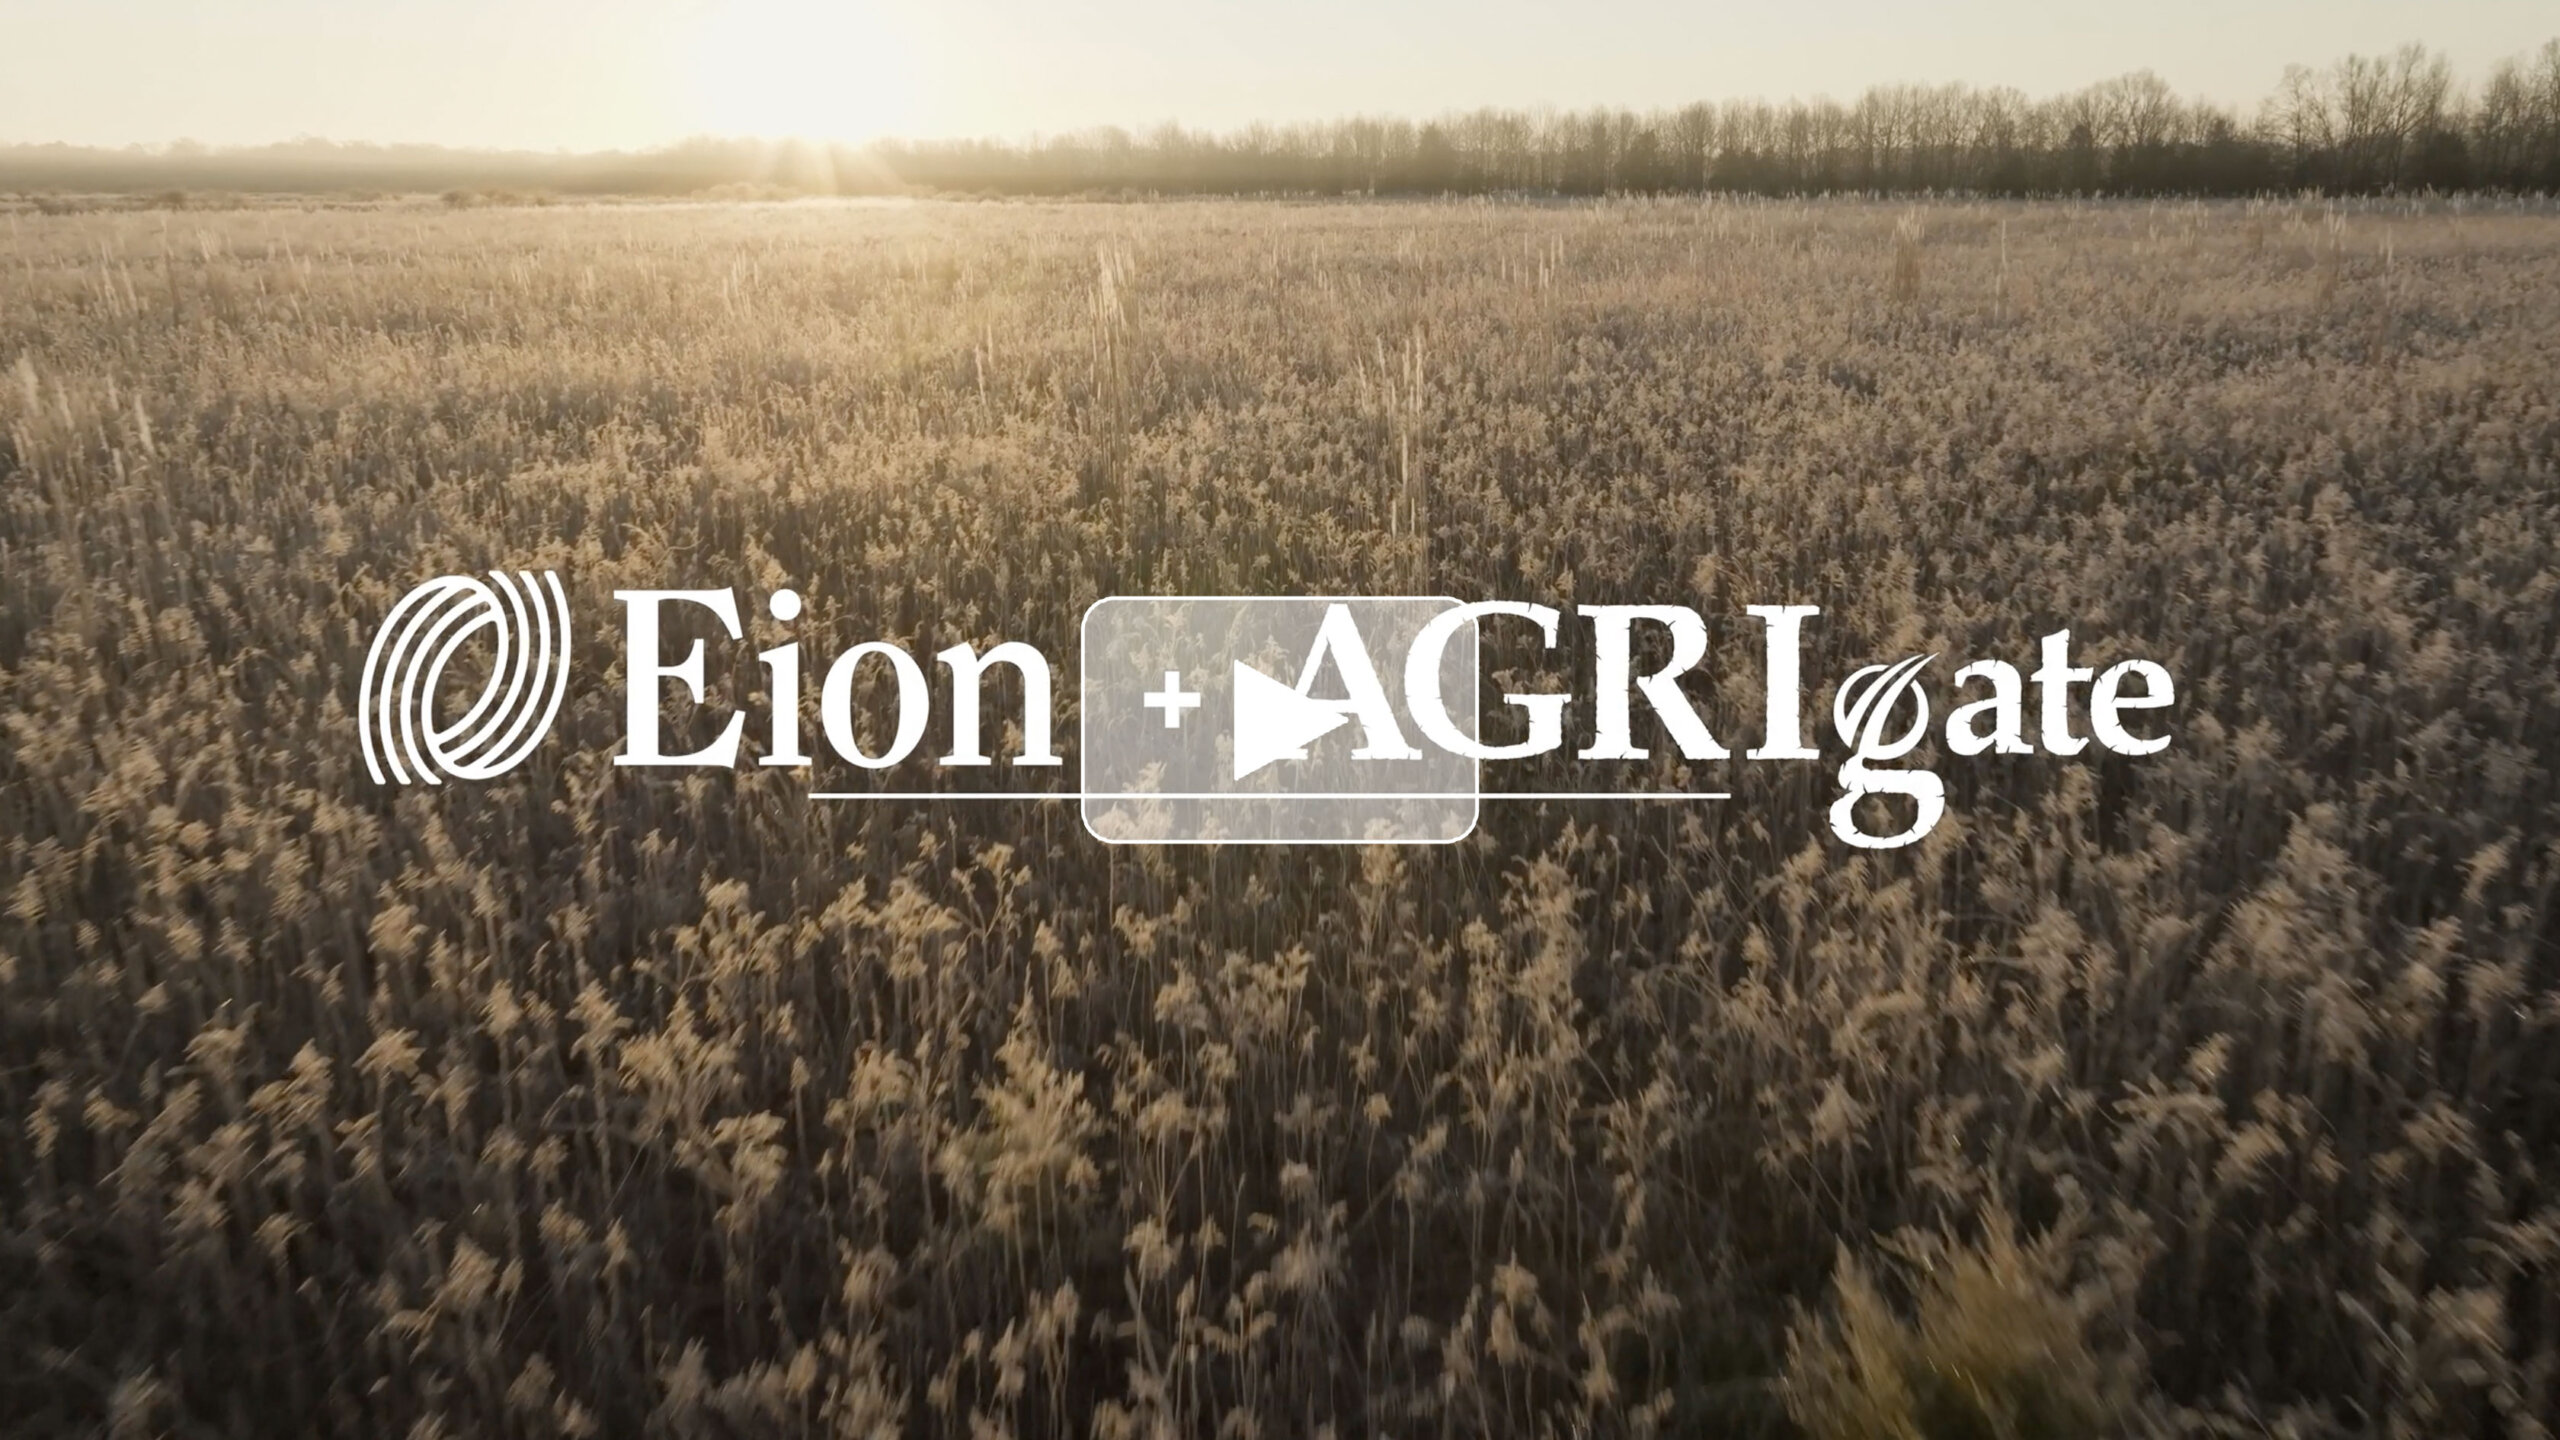 Video cover image for Eion + AGRIgate promotional video